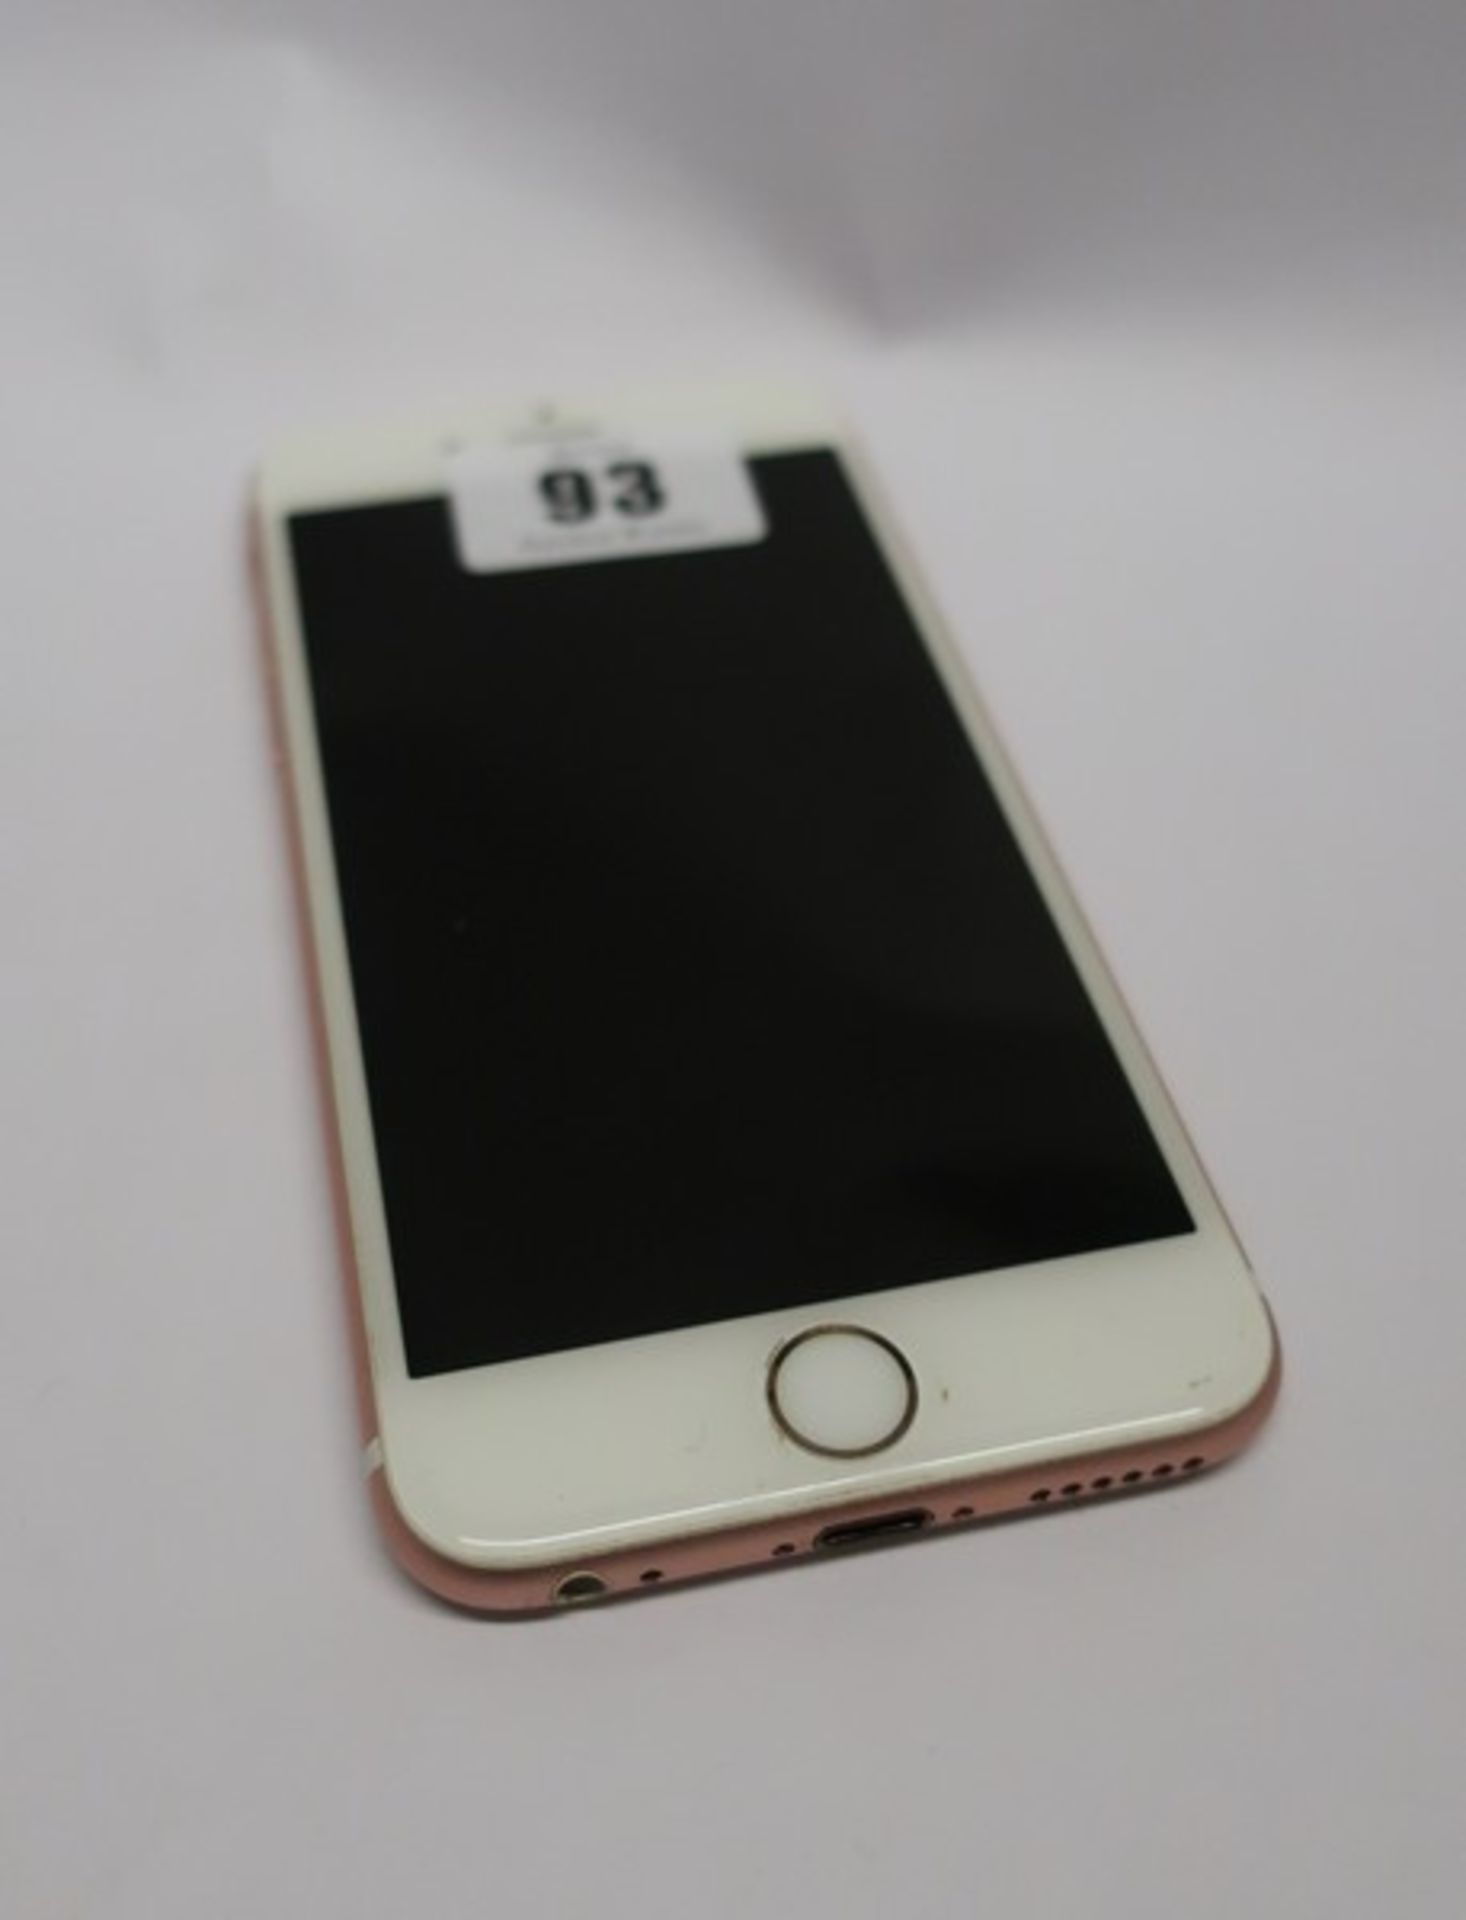 An Apple iPhone 6S 64GB model A1688 (IMEI: 355396083763543) (Activation locked) (Sold for spares